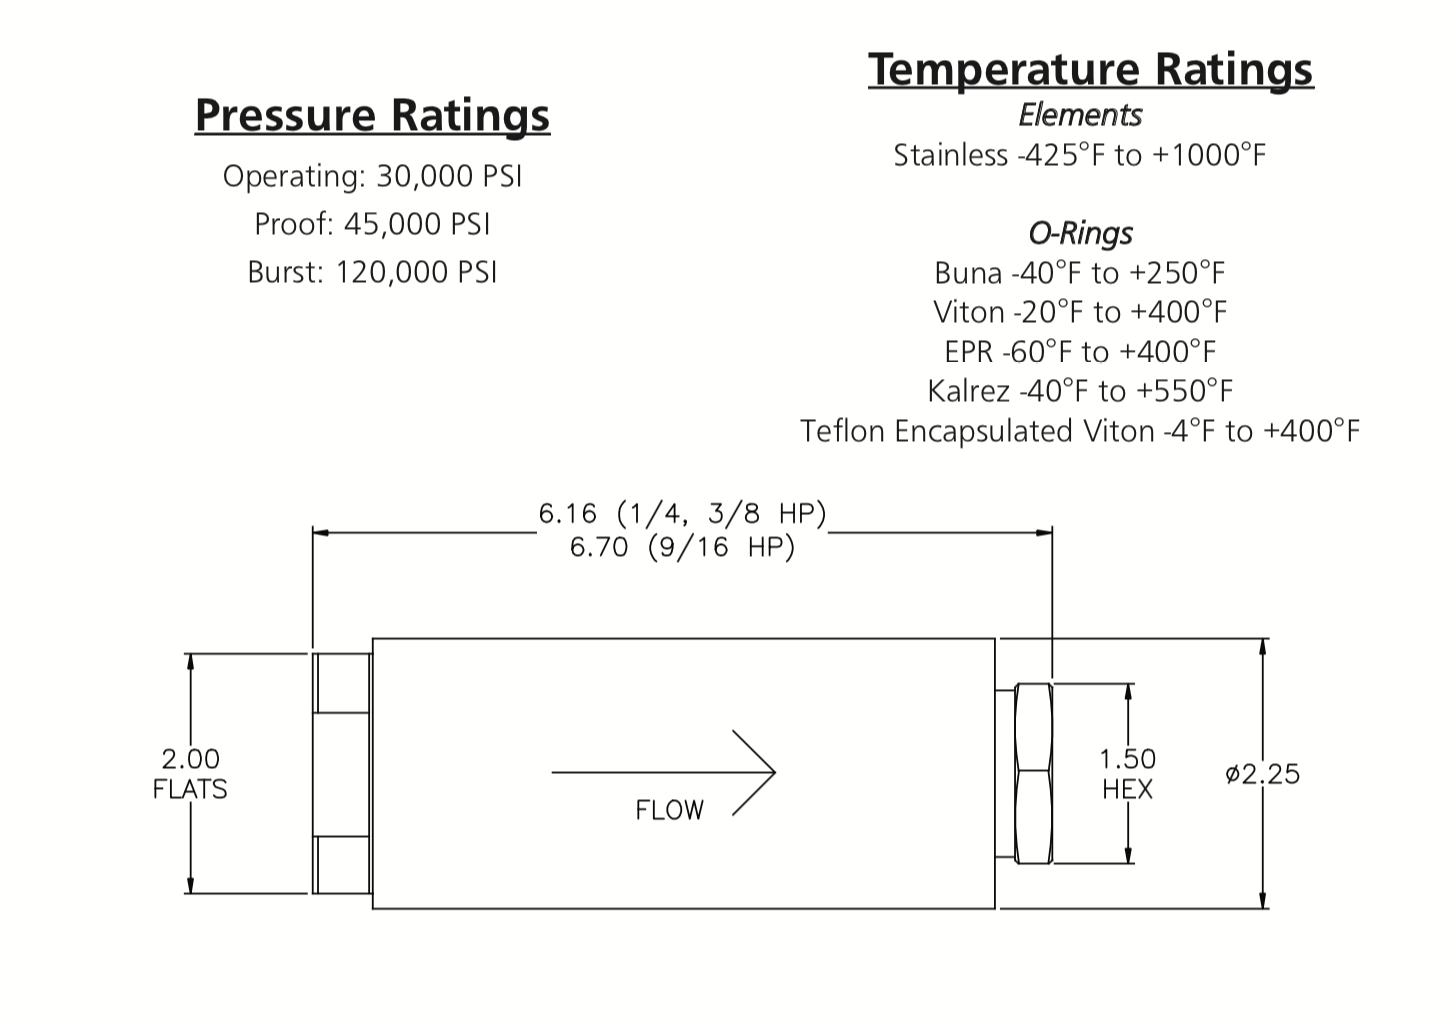 Pressure and Temperature ratings for 33 series filters